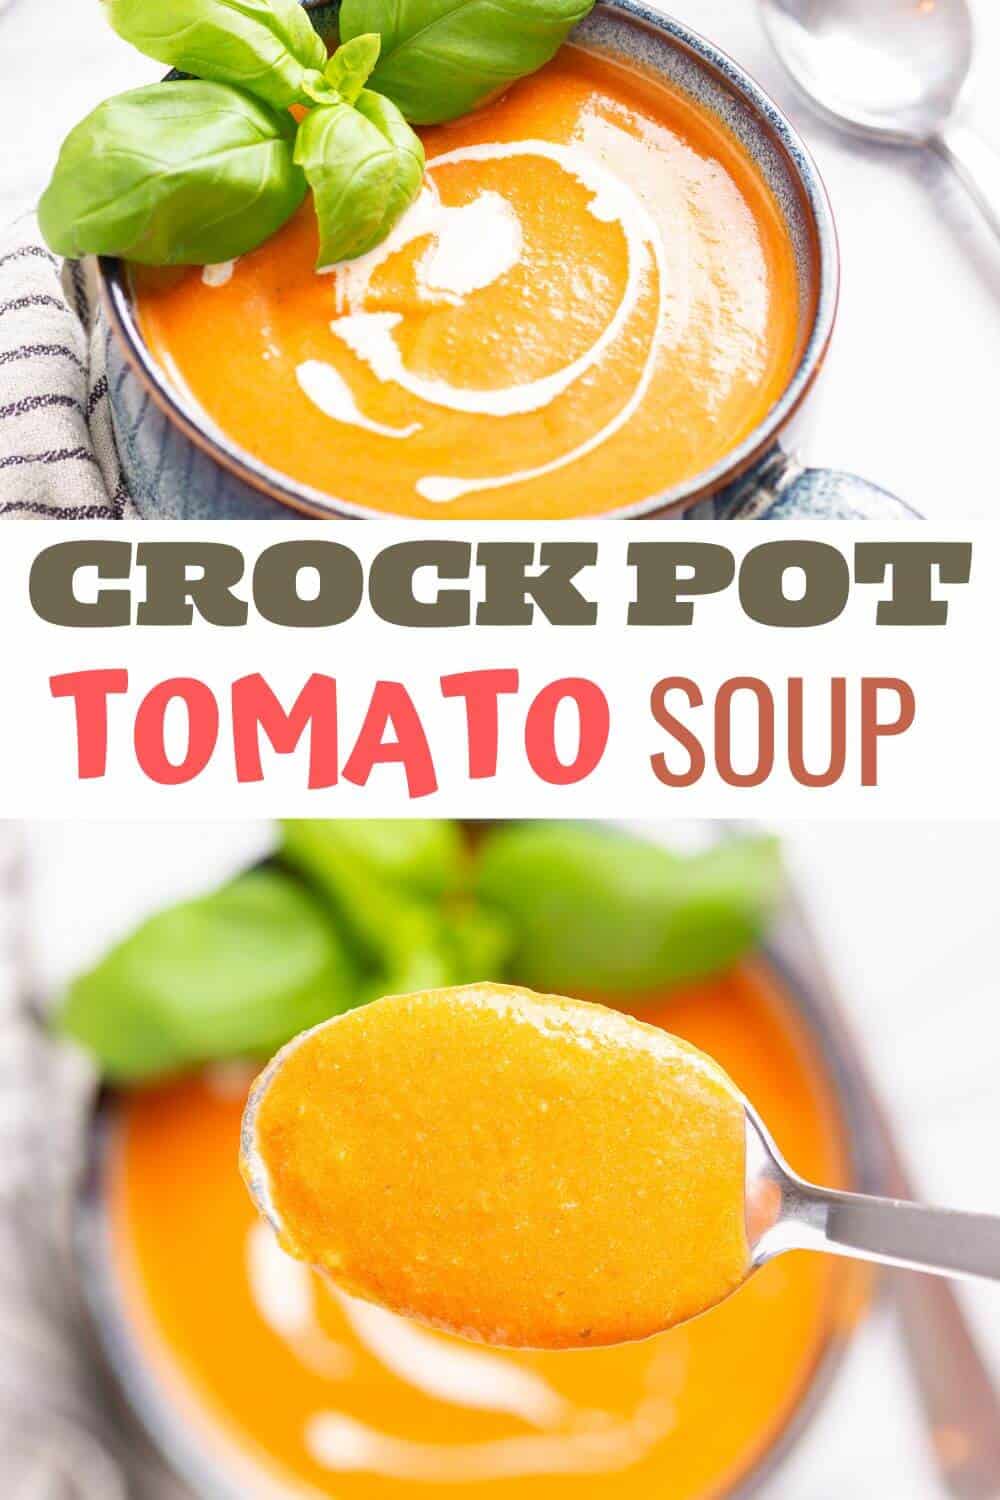 A bowl of tomato soup with basil garnish, with text "crockpot tomato soup" above it and a spoonful of soup held up in the bottom image.